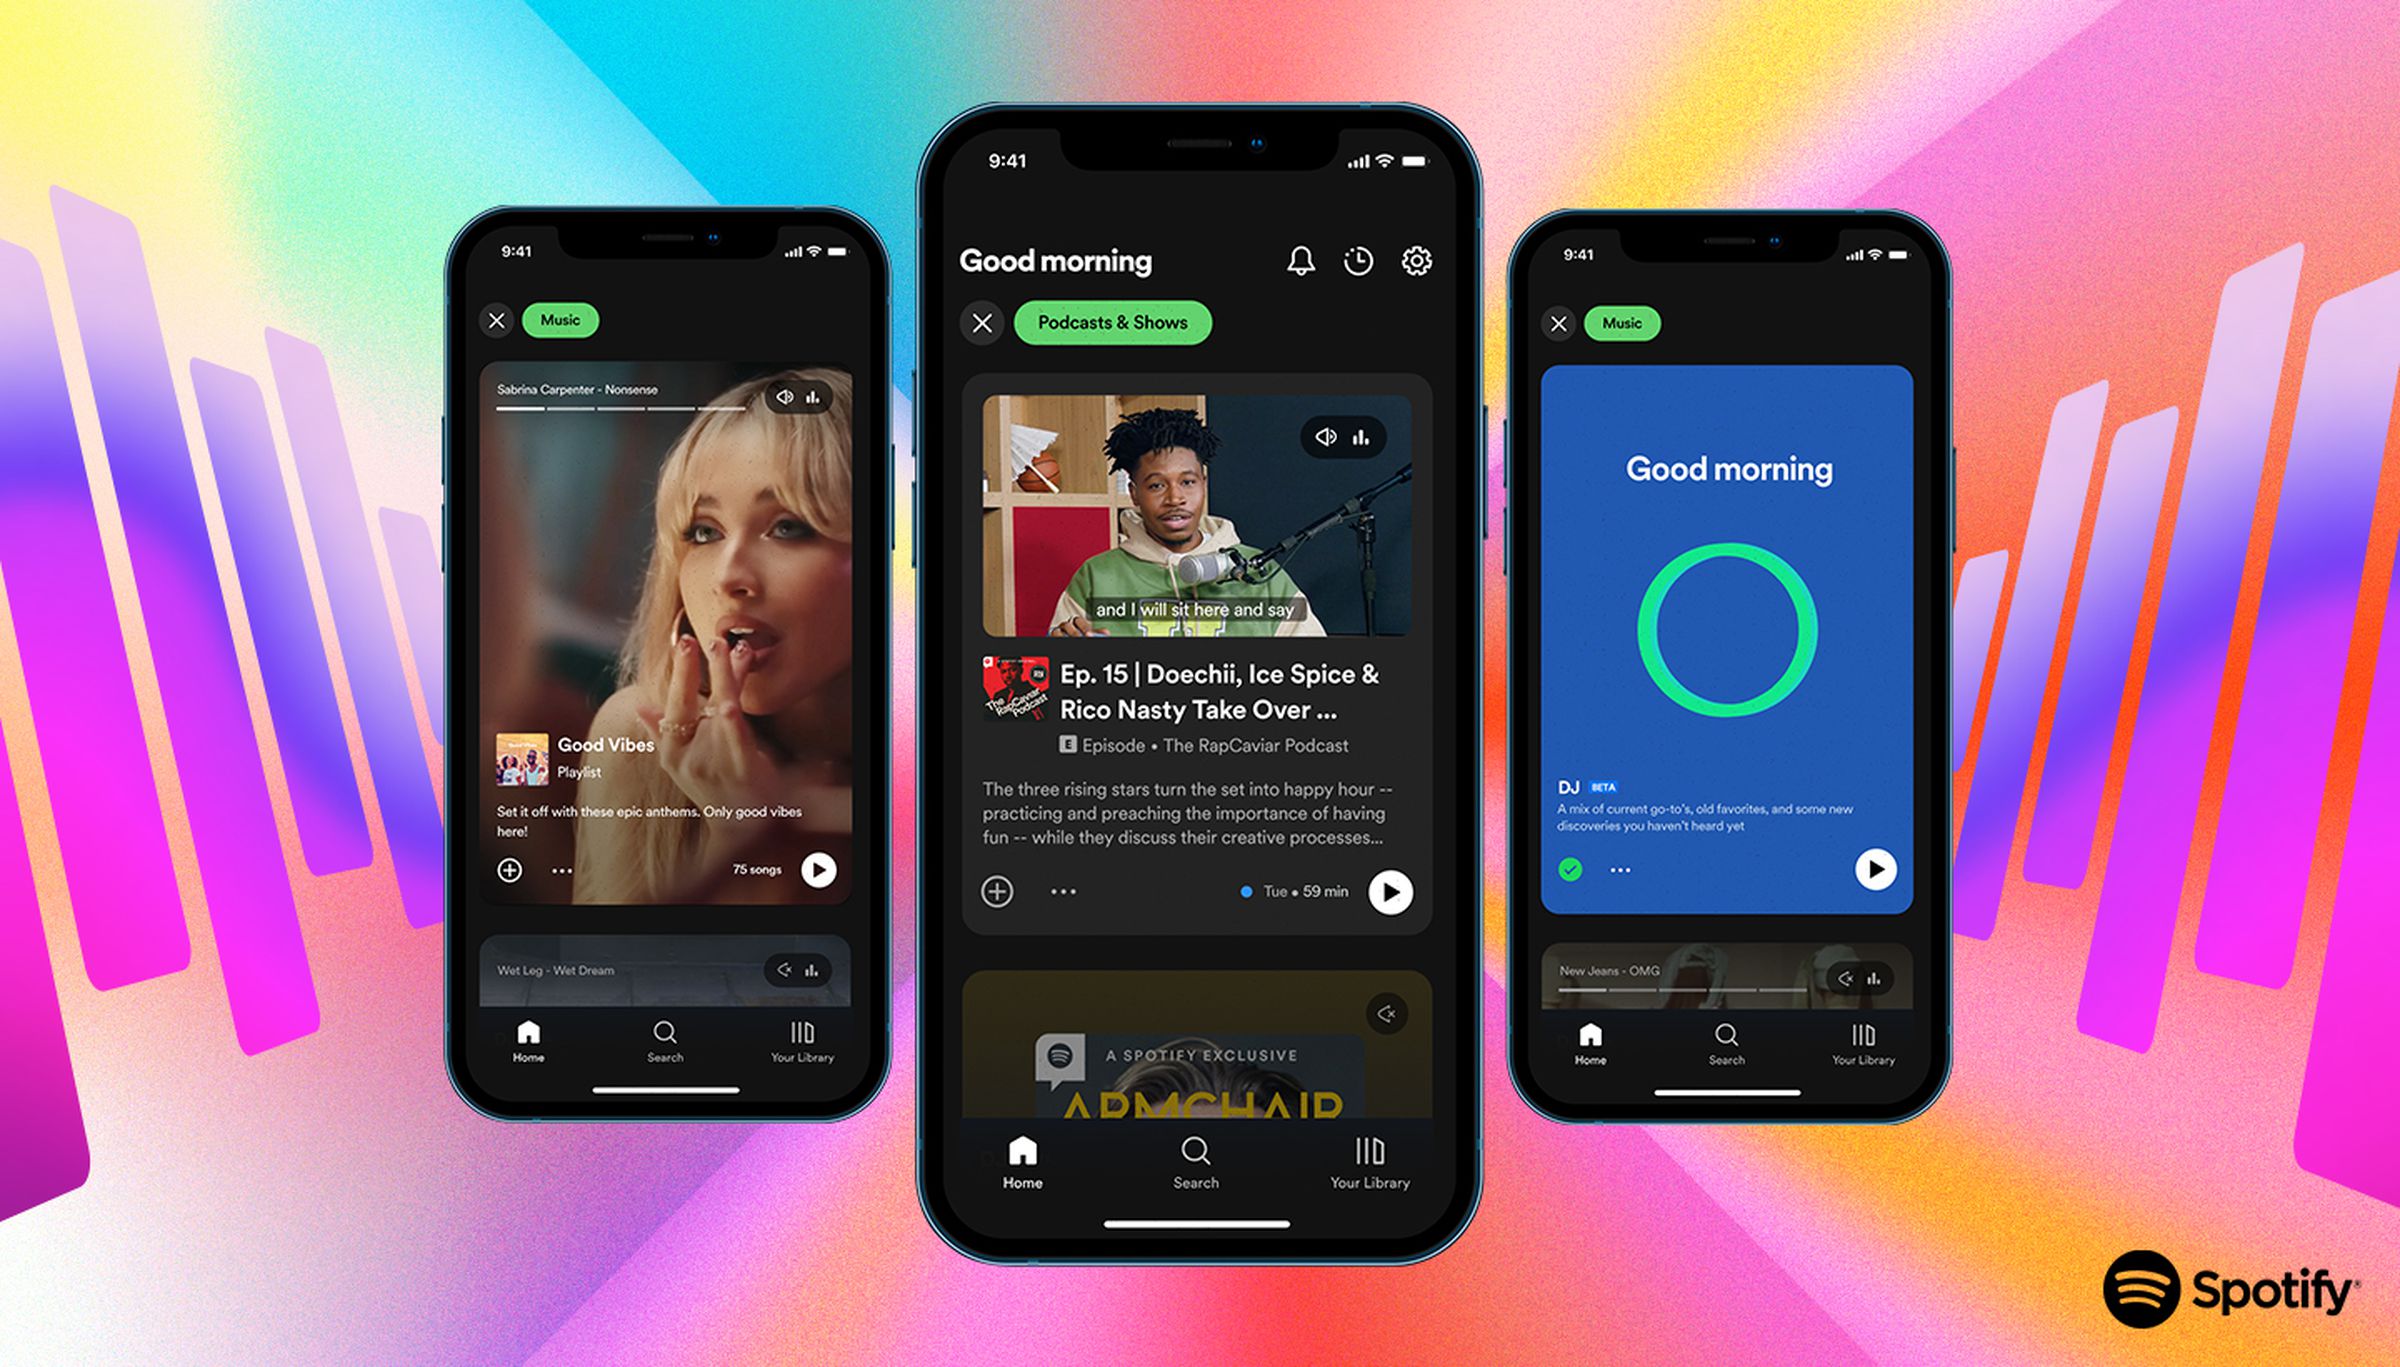 Three screenshots of the new Spotify home screen, with podcasting in the center.